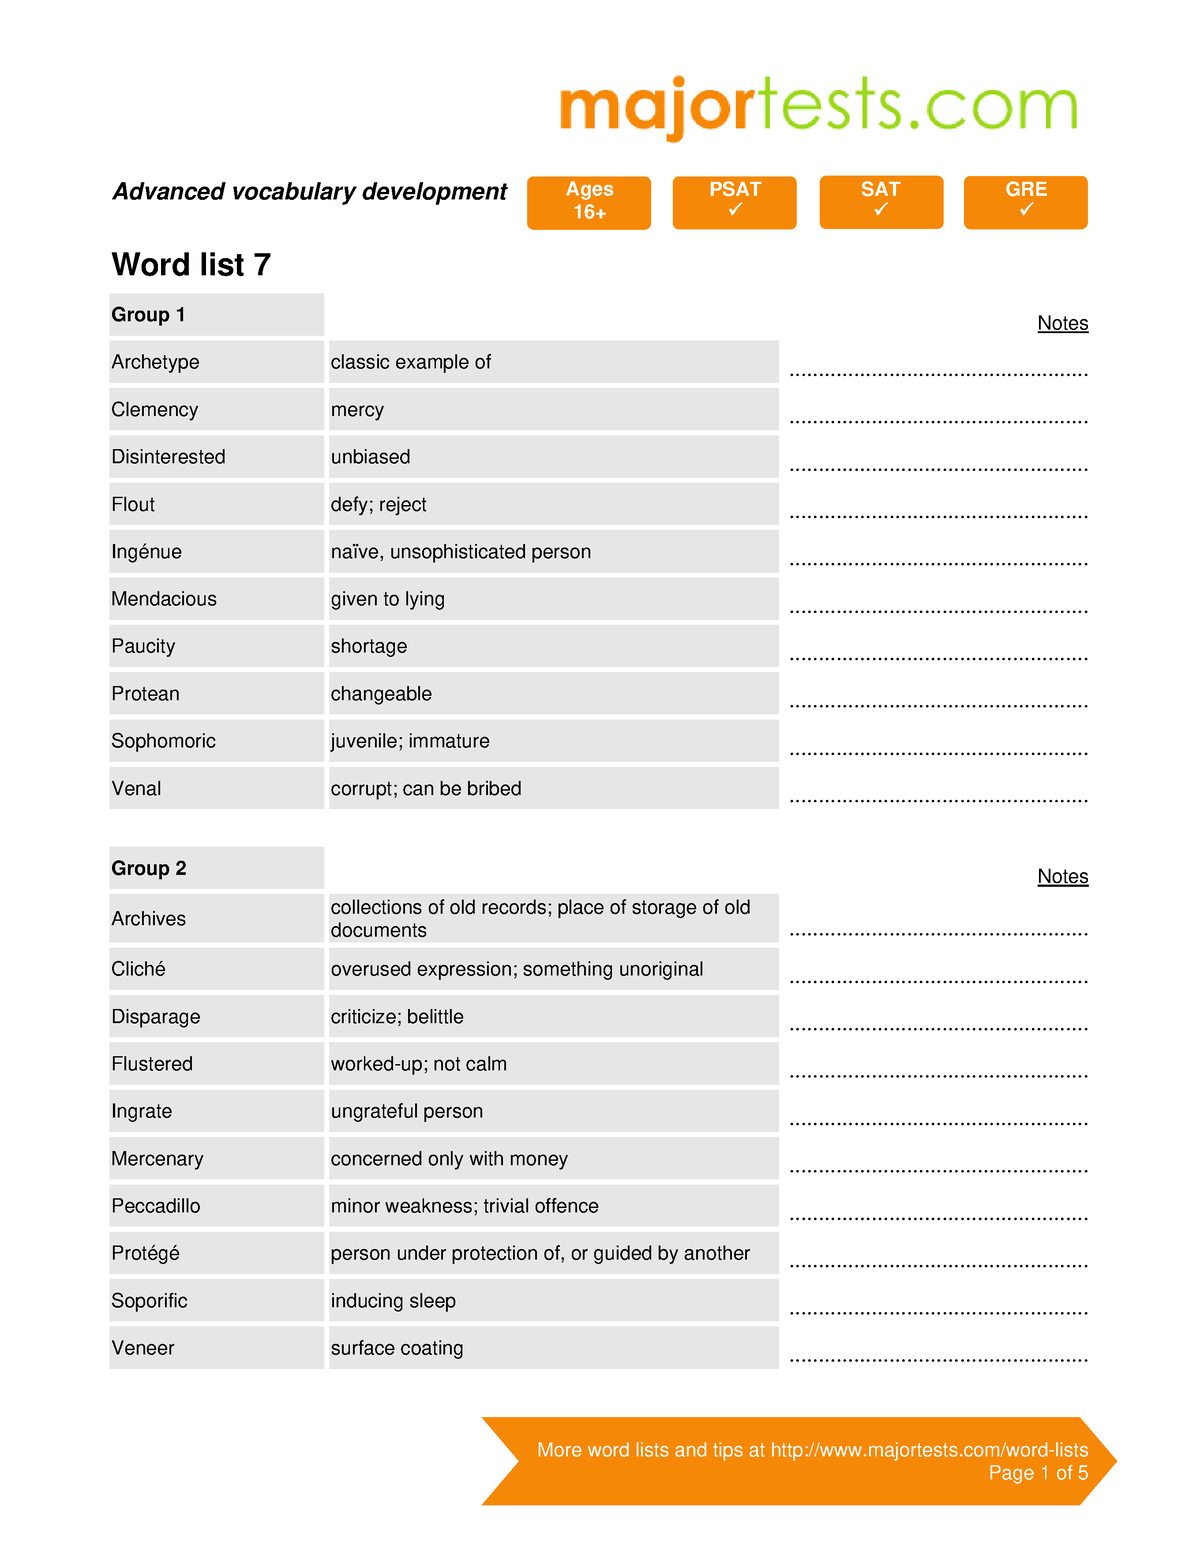 word-list-07-word-list-07-more-word-lists-and-tips-at-majortests-word-lists-advanced